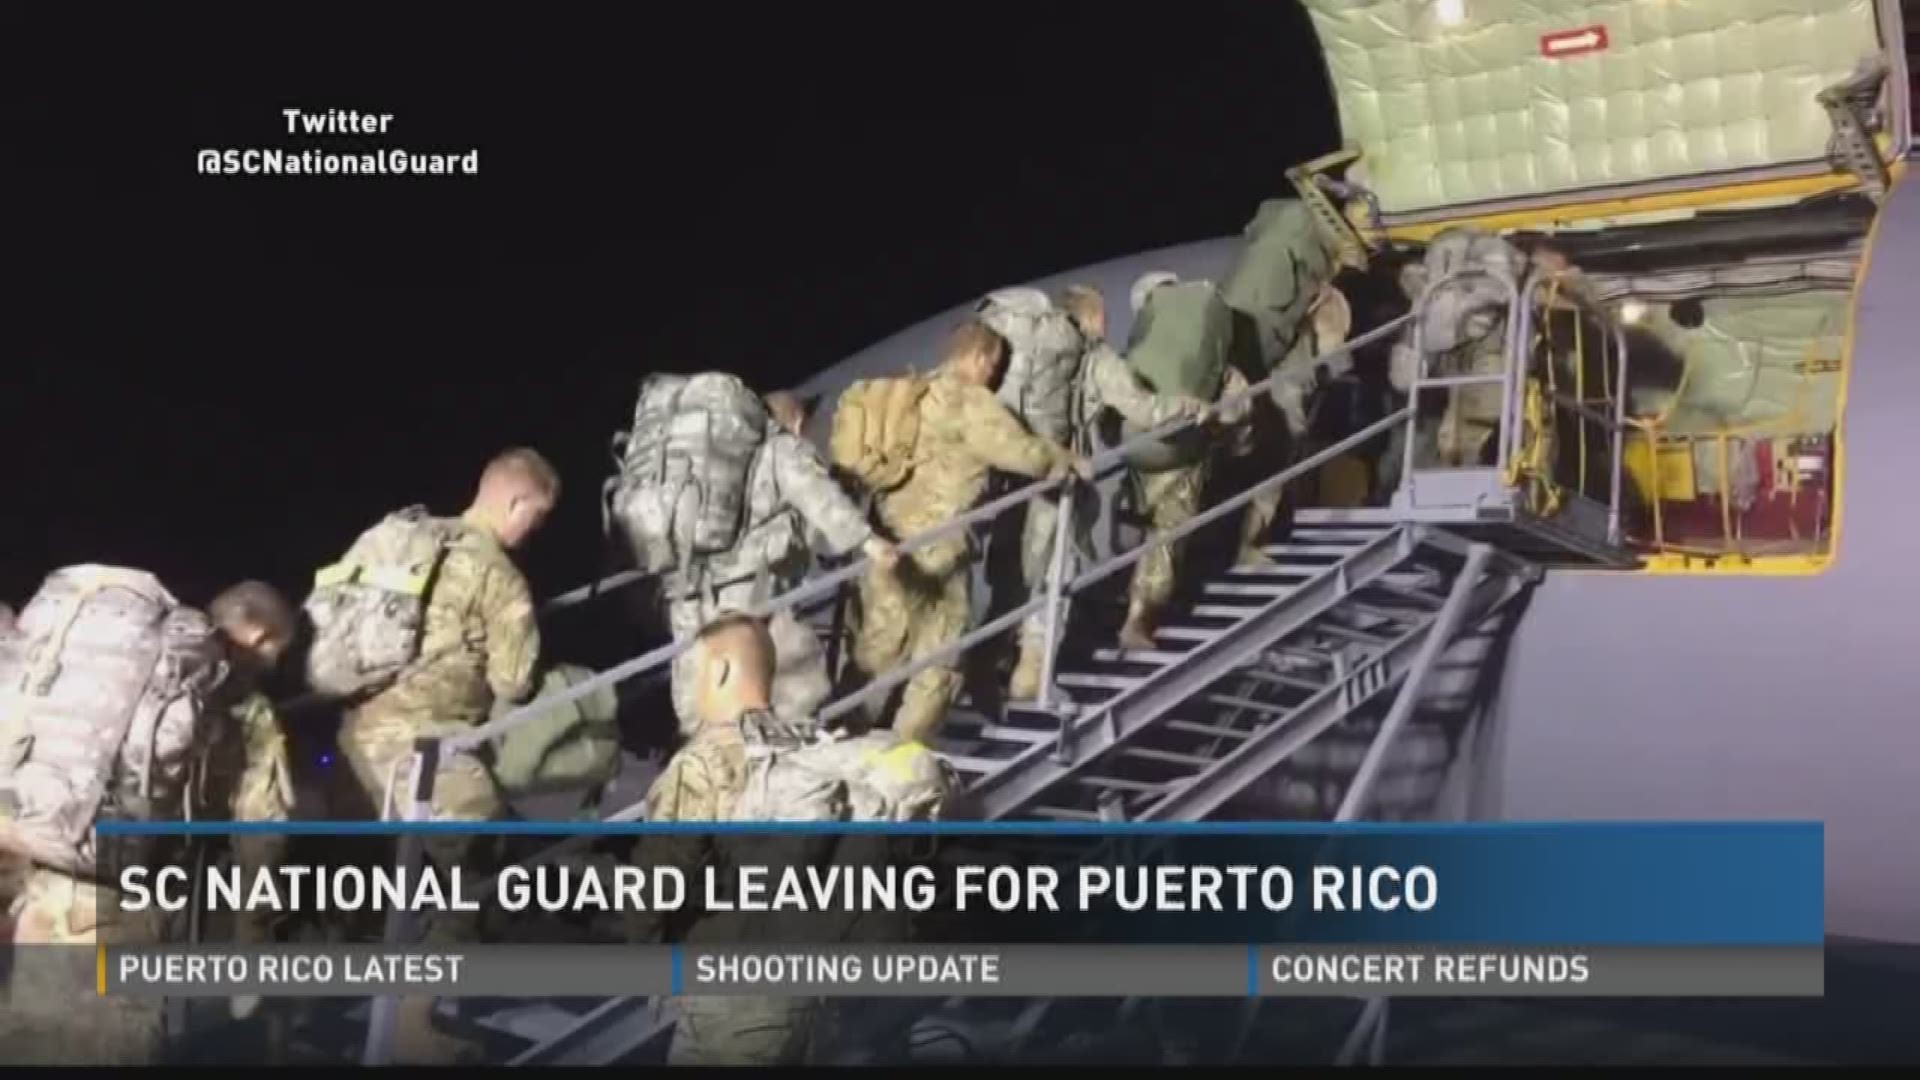 Members of the South Carolina National Guard left for Puerto Rico Sunday night.